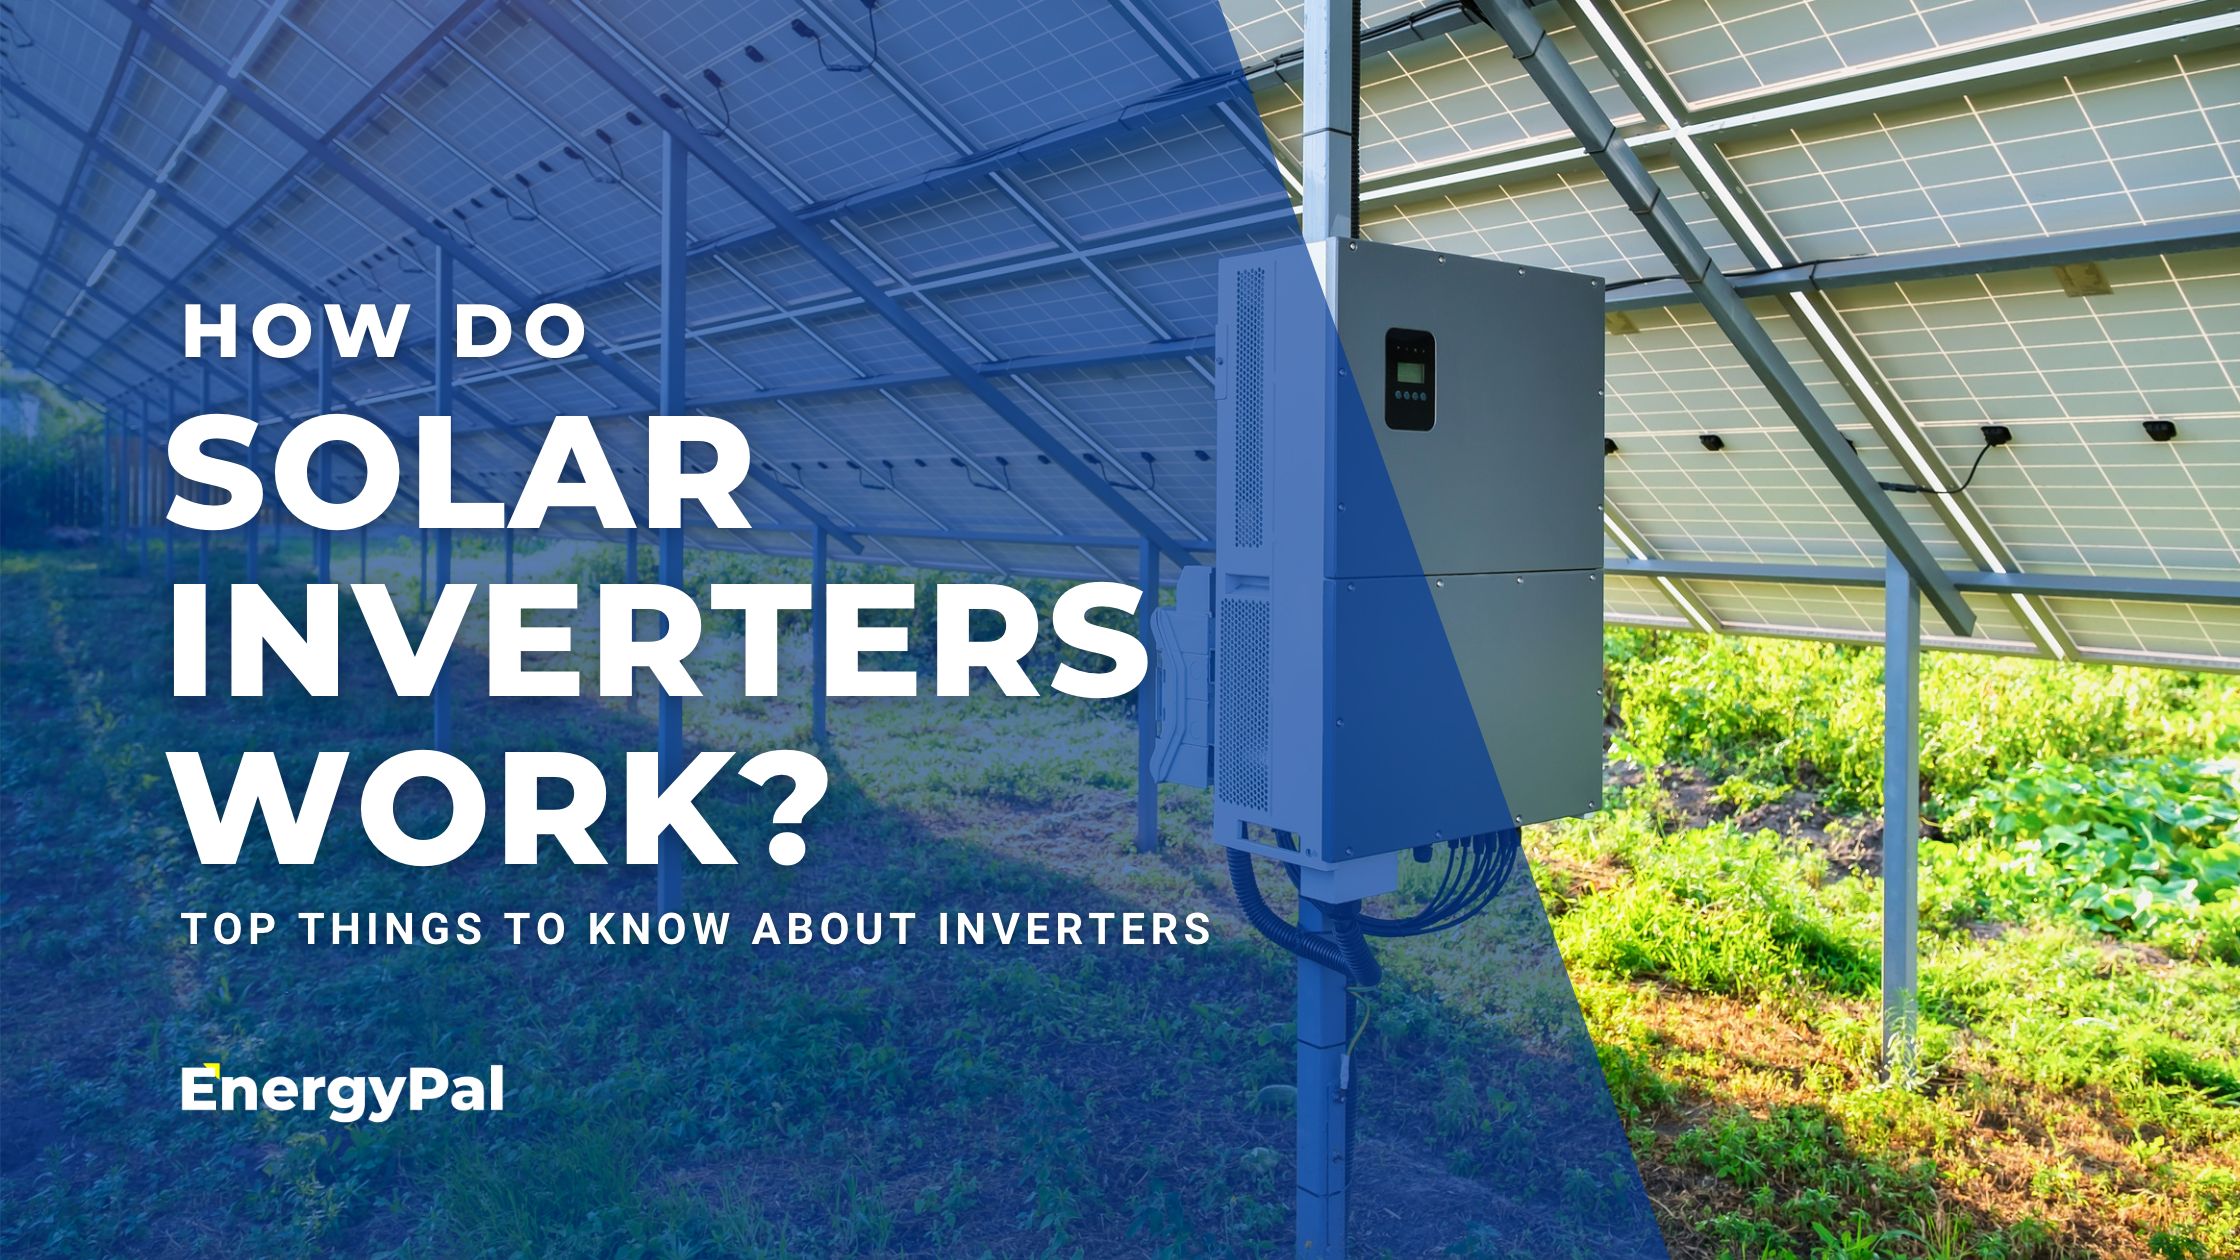 What Are Solar Inverters?: How do Solar inverters work?